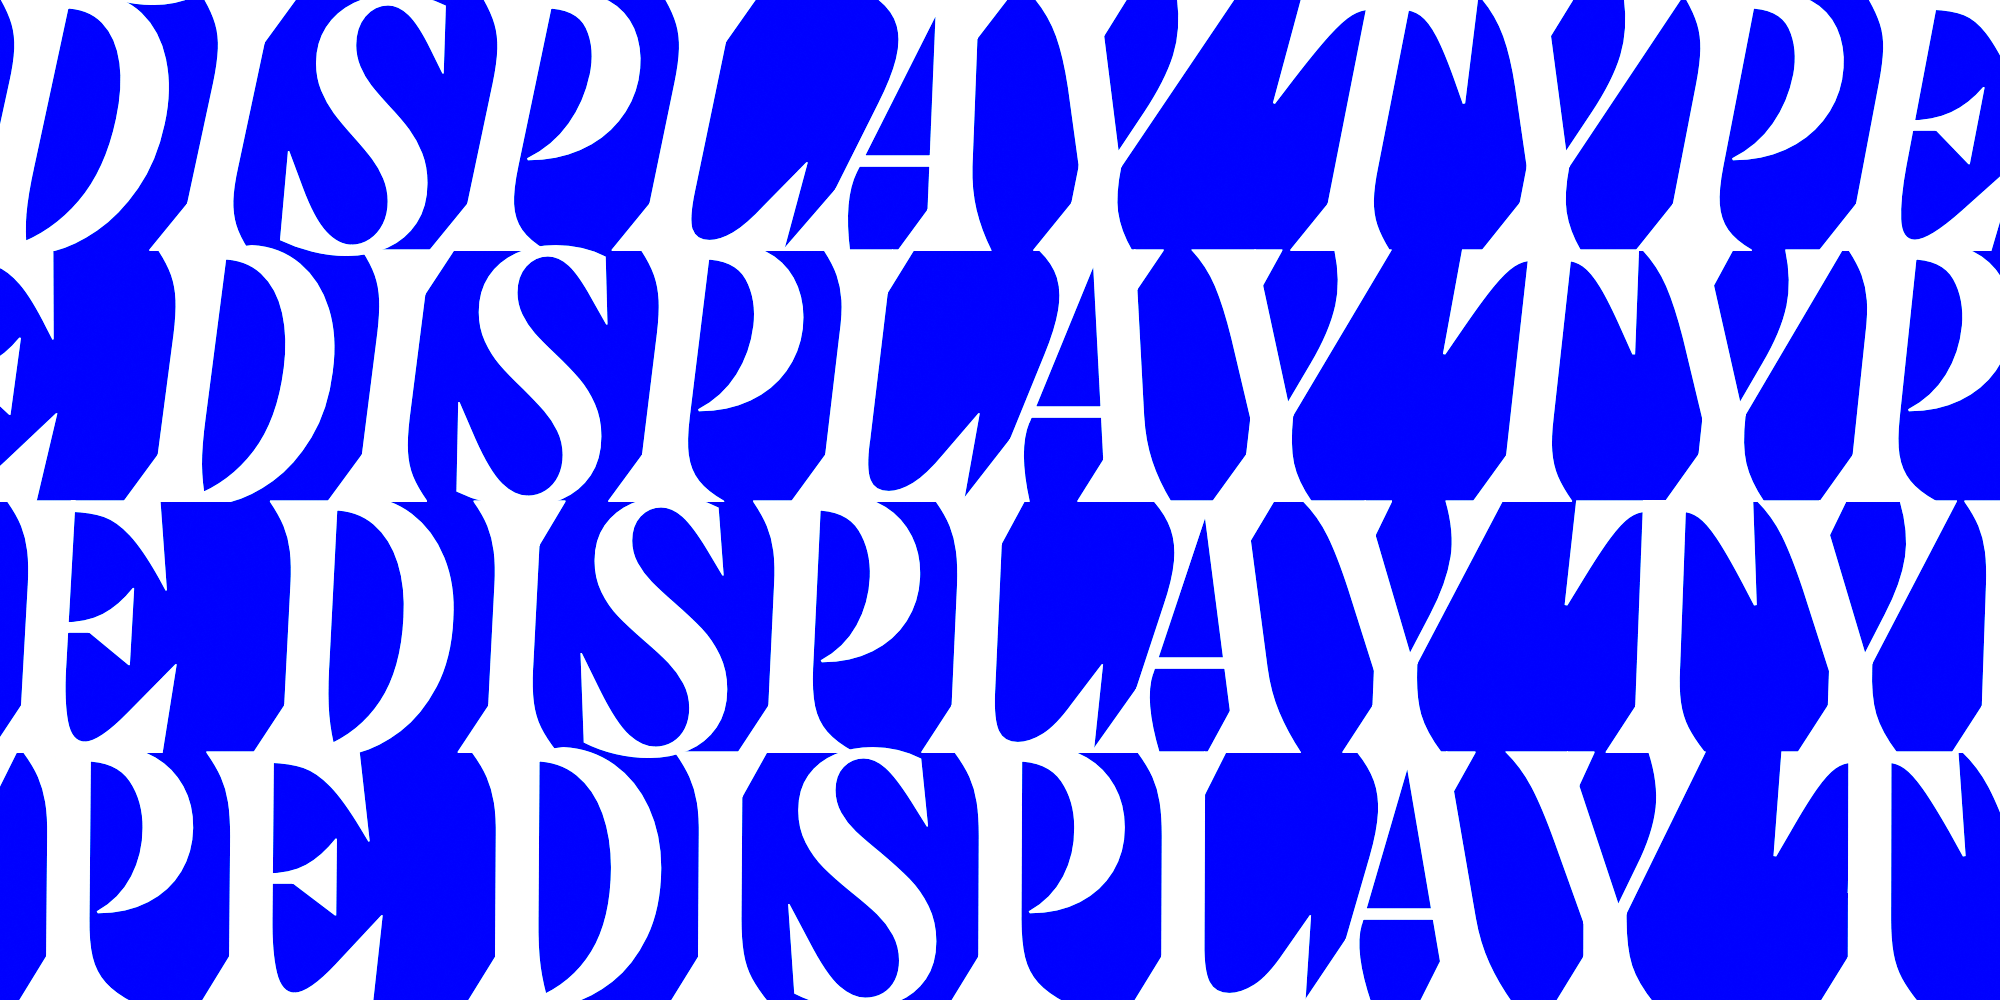 The words "Display Type" are rendered on white letters over a blue background.